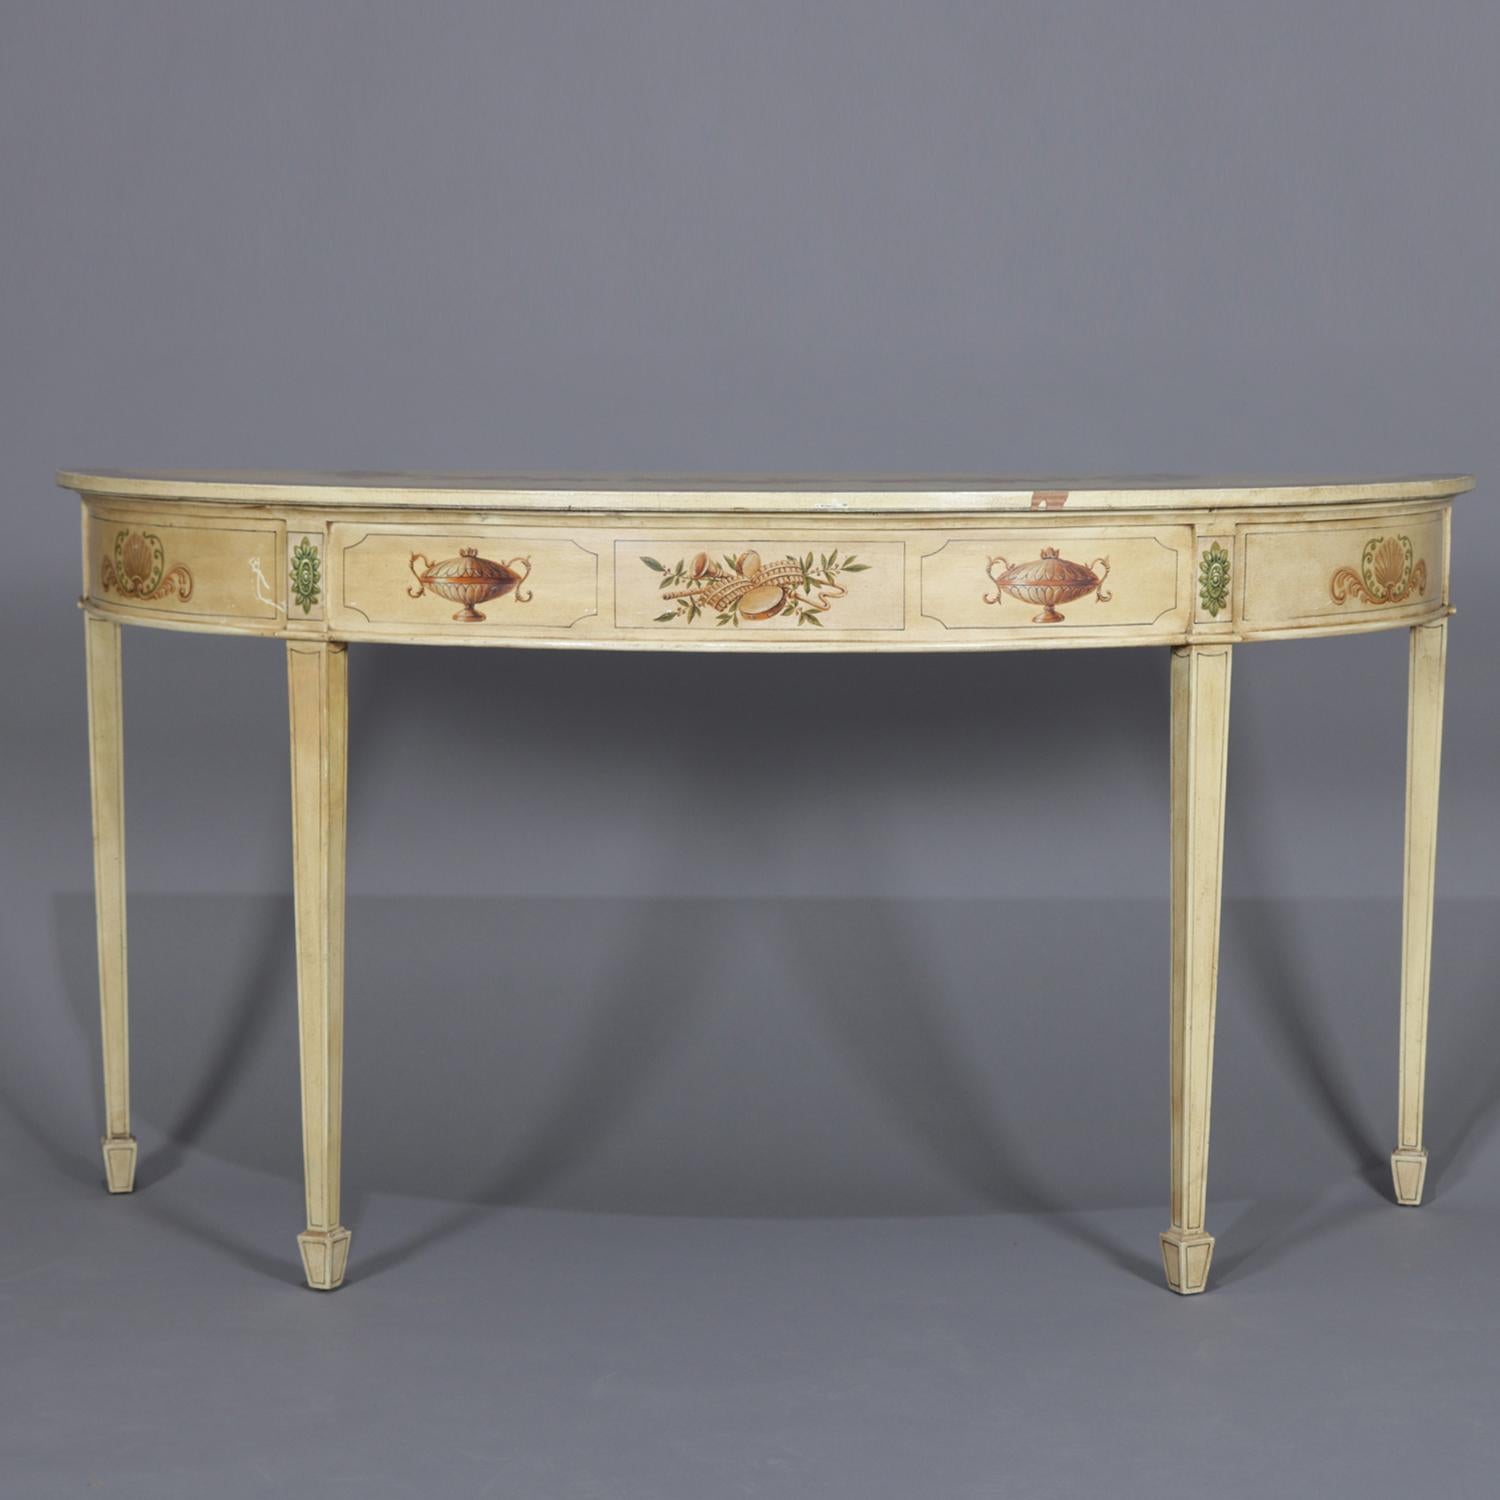 Carved Vintage French Neoclassical Paint & Gilt Decorated Demilune Console Table